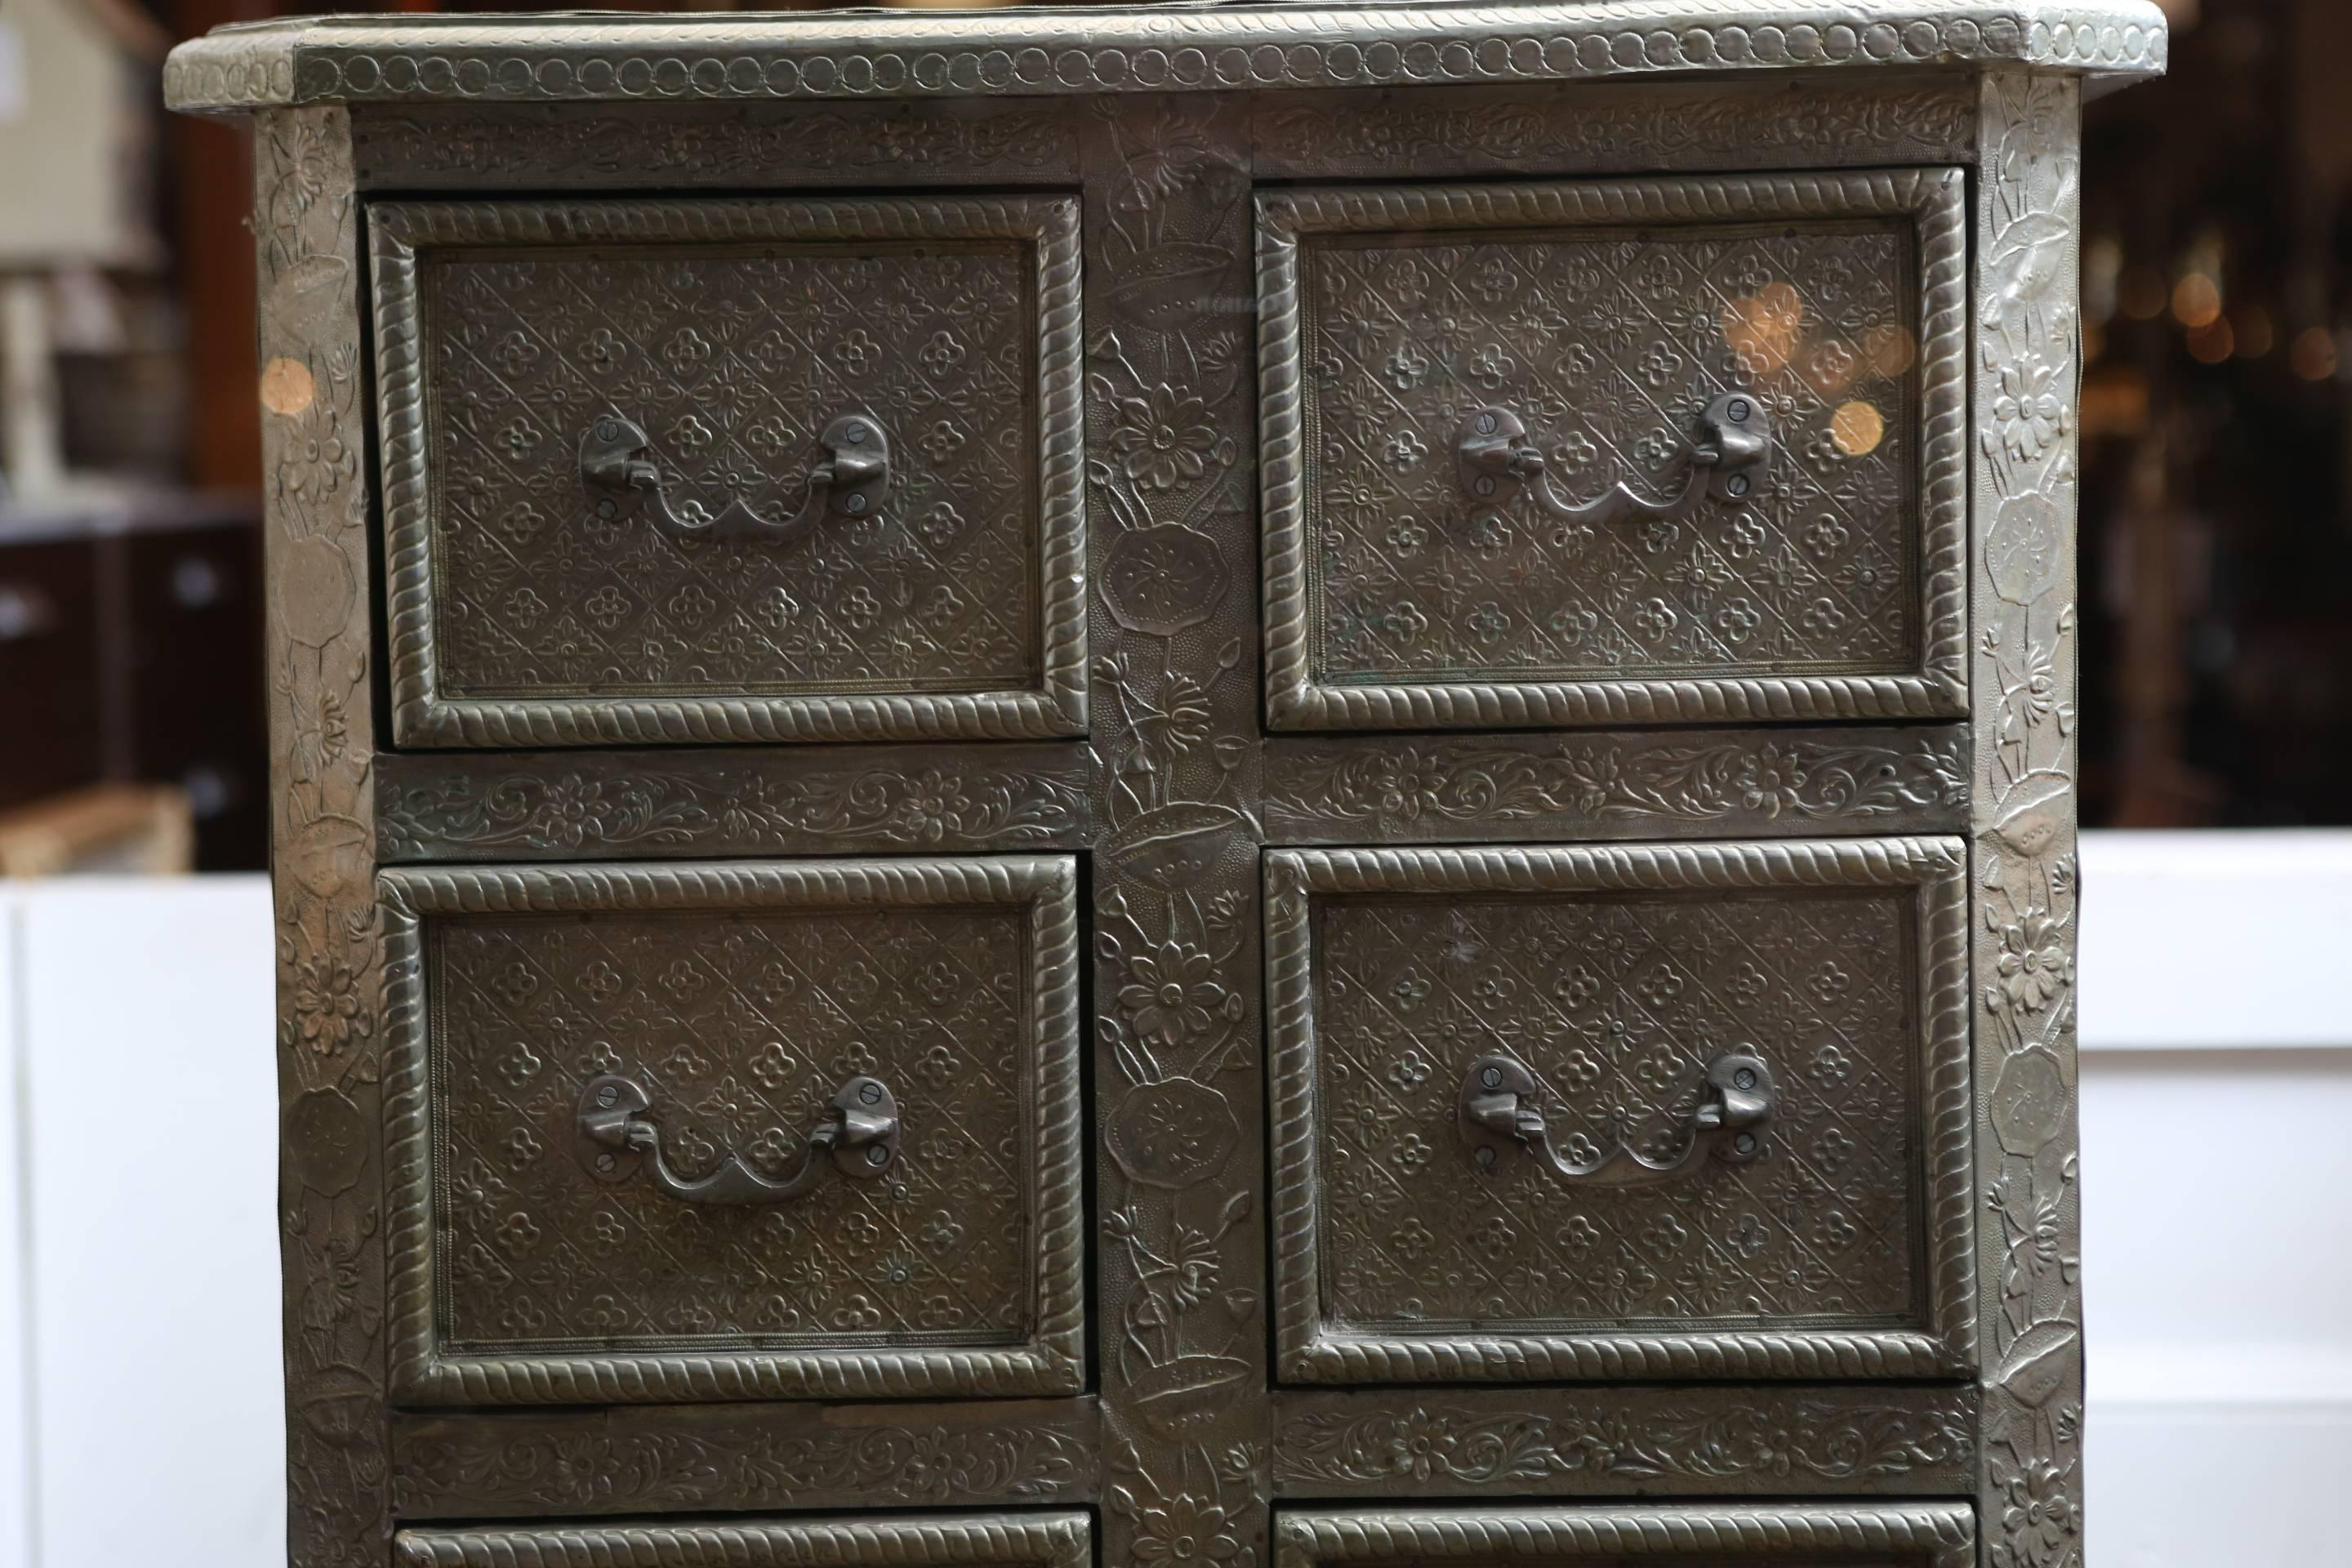 A lovely rare Victorian pressed tin cabinet with floral pattern. Has a wonderful aged patina. Originally bought at auction for $1,400.